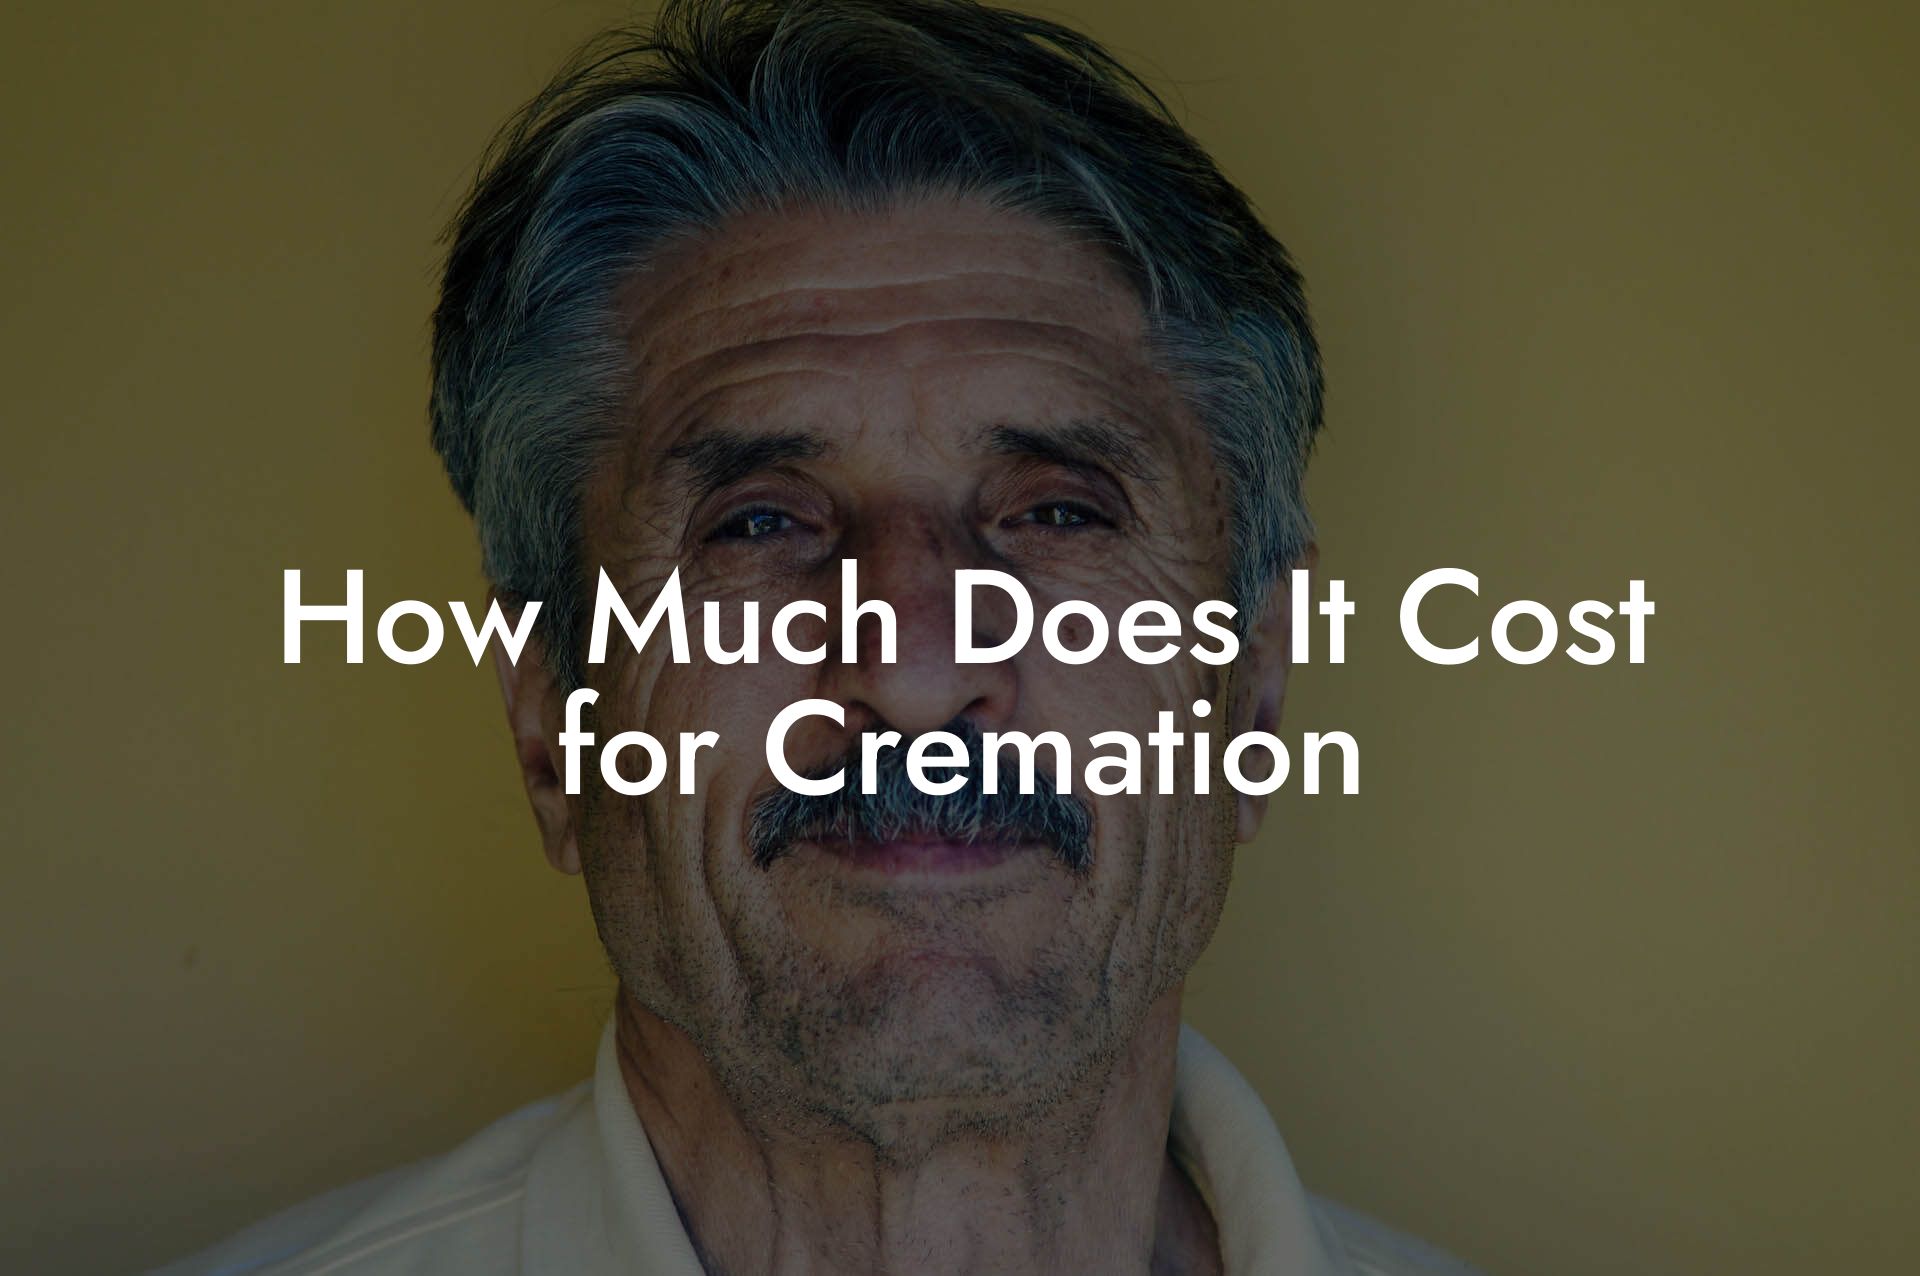 How Much Does It Cost for Cremation